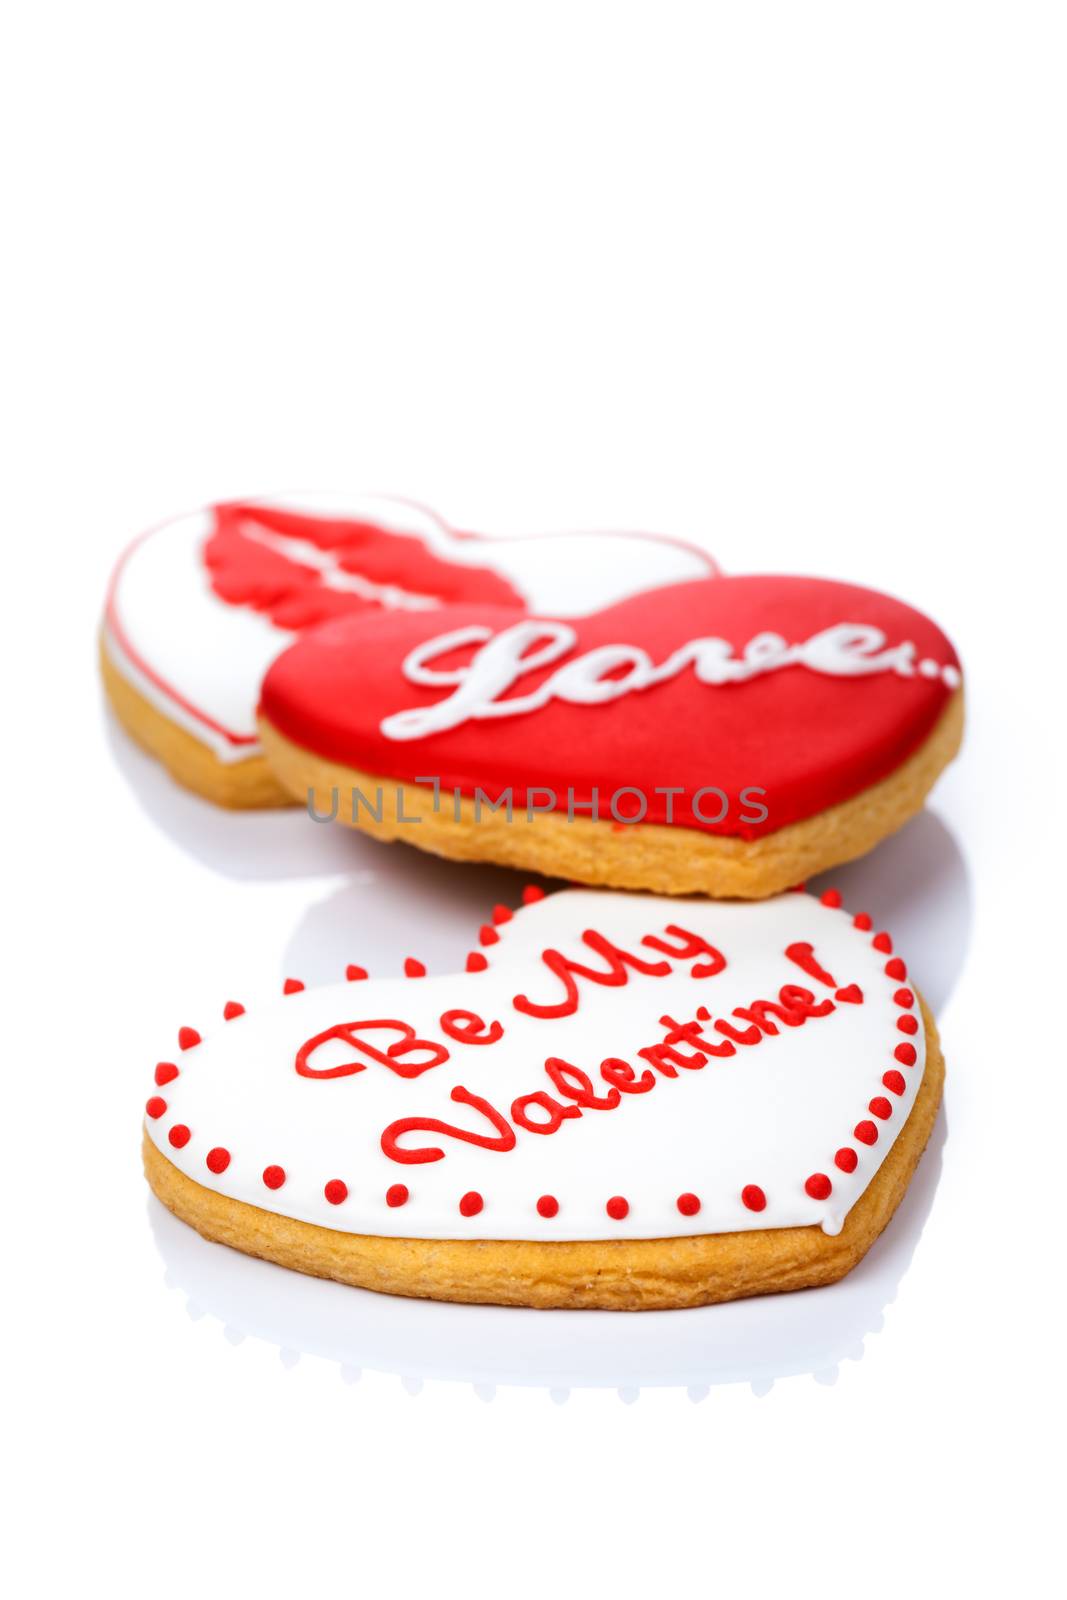 Cookies in shape of heart on white background for Valentine's Day